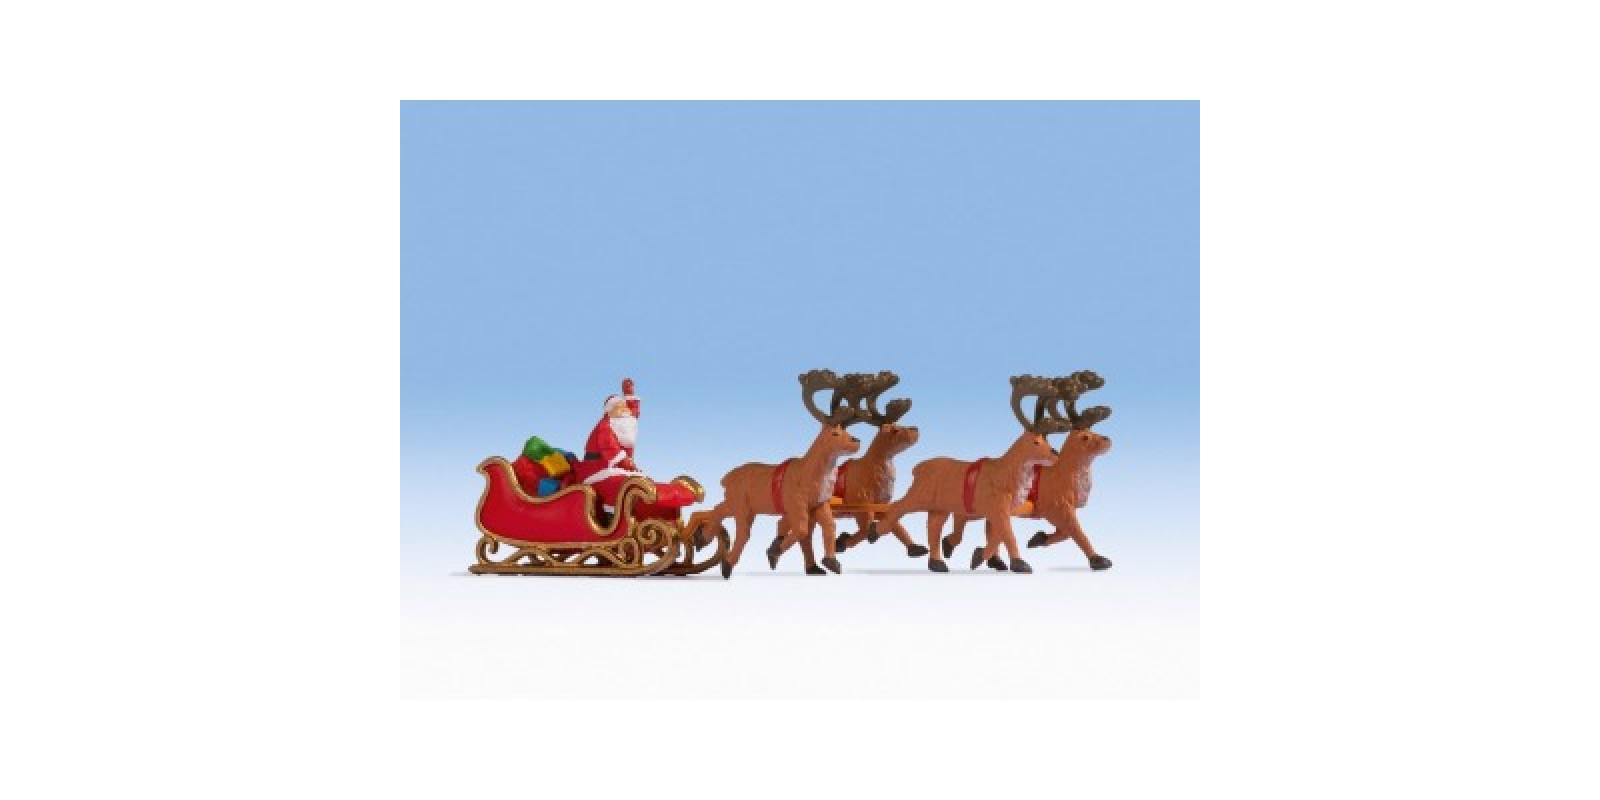 NO15924  Santa Claus with carriage